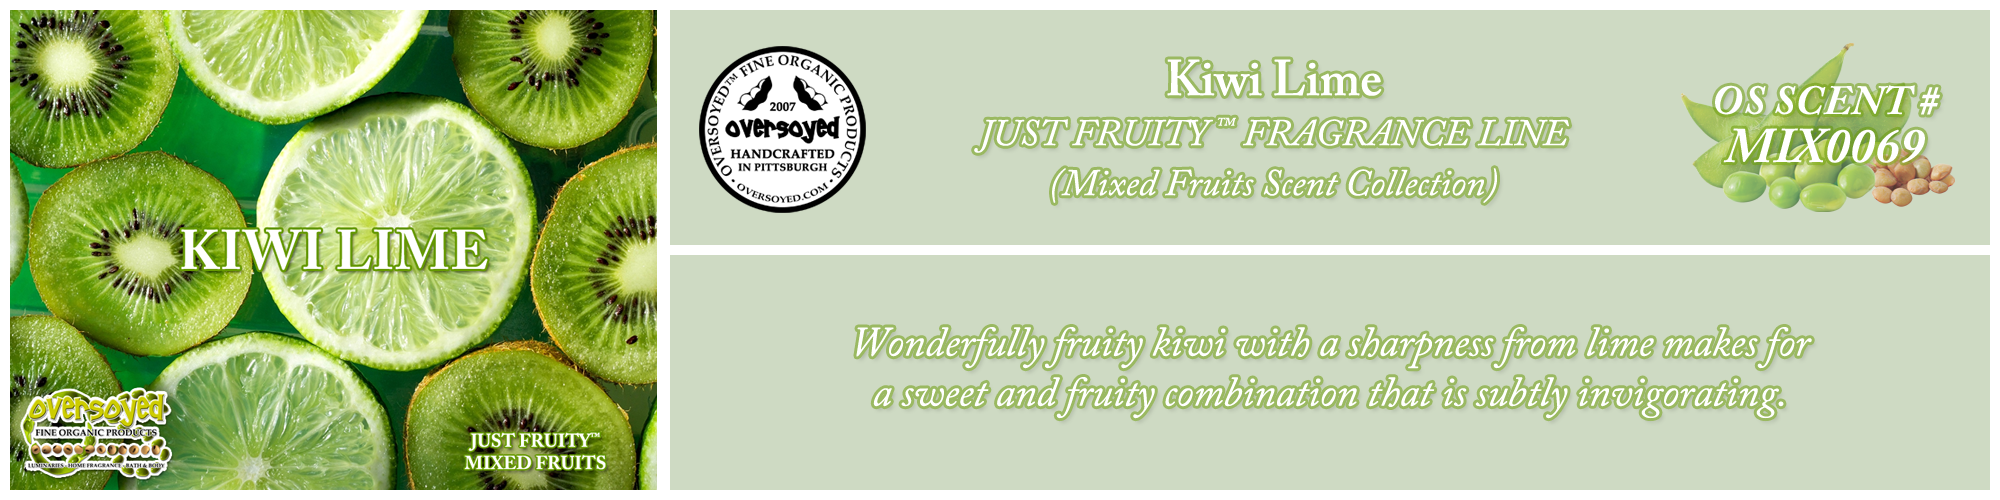 Kiwi Lime Handcrafted Products Collection